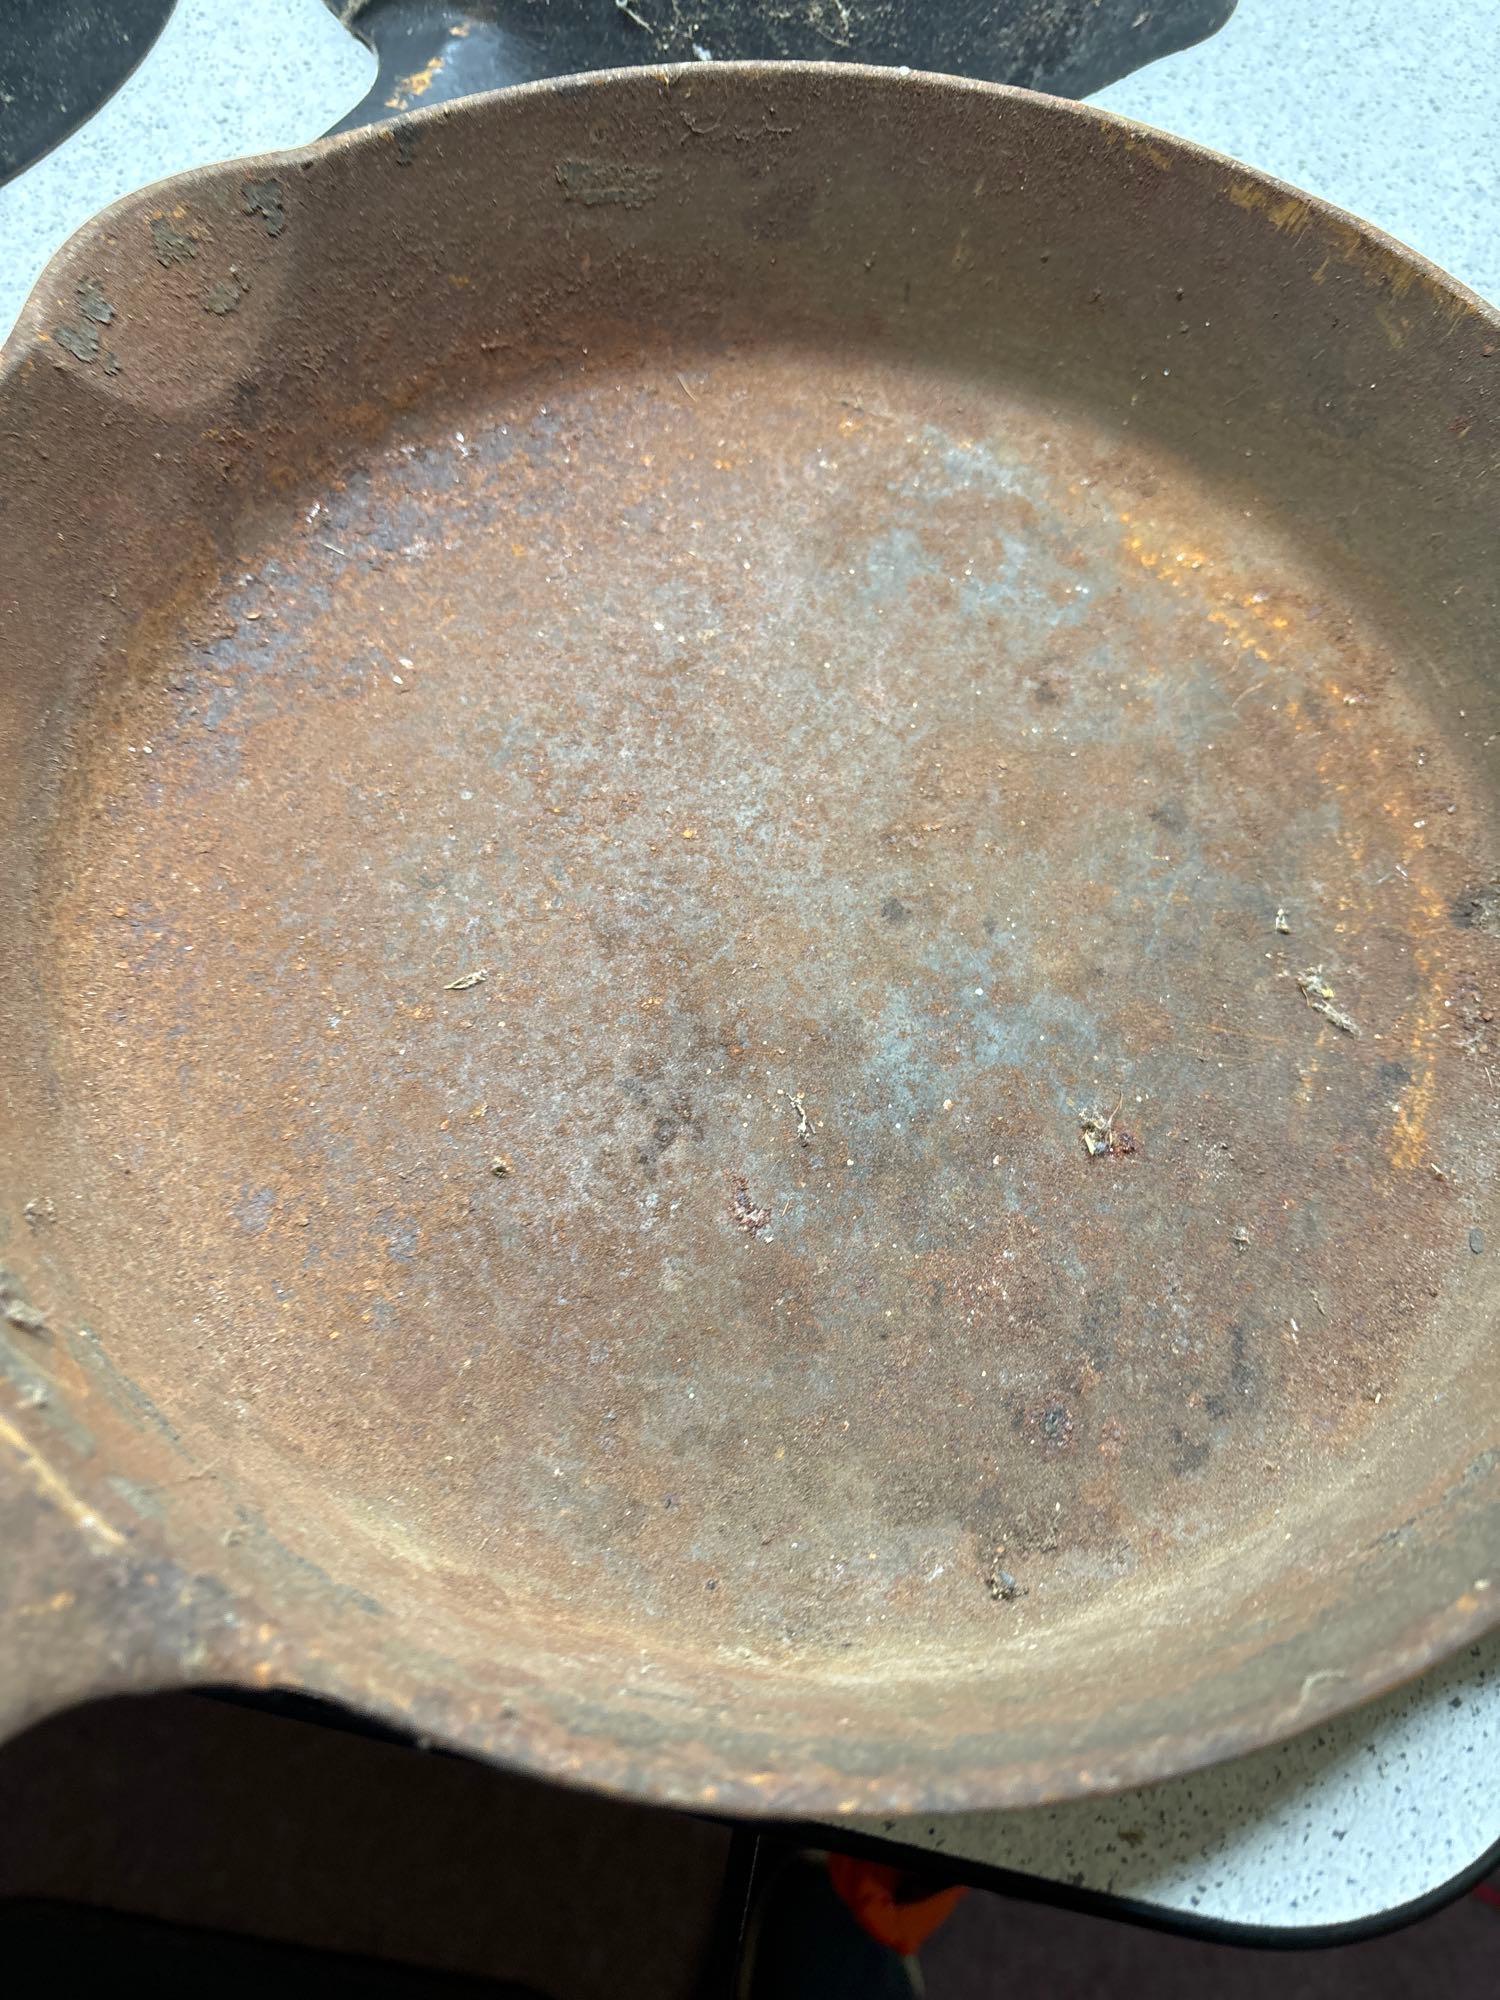 Wagner And other cast-iron pans and griddle